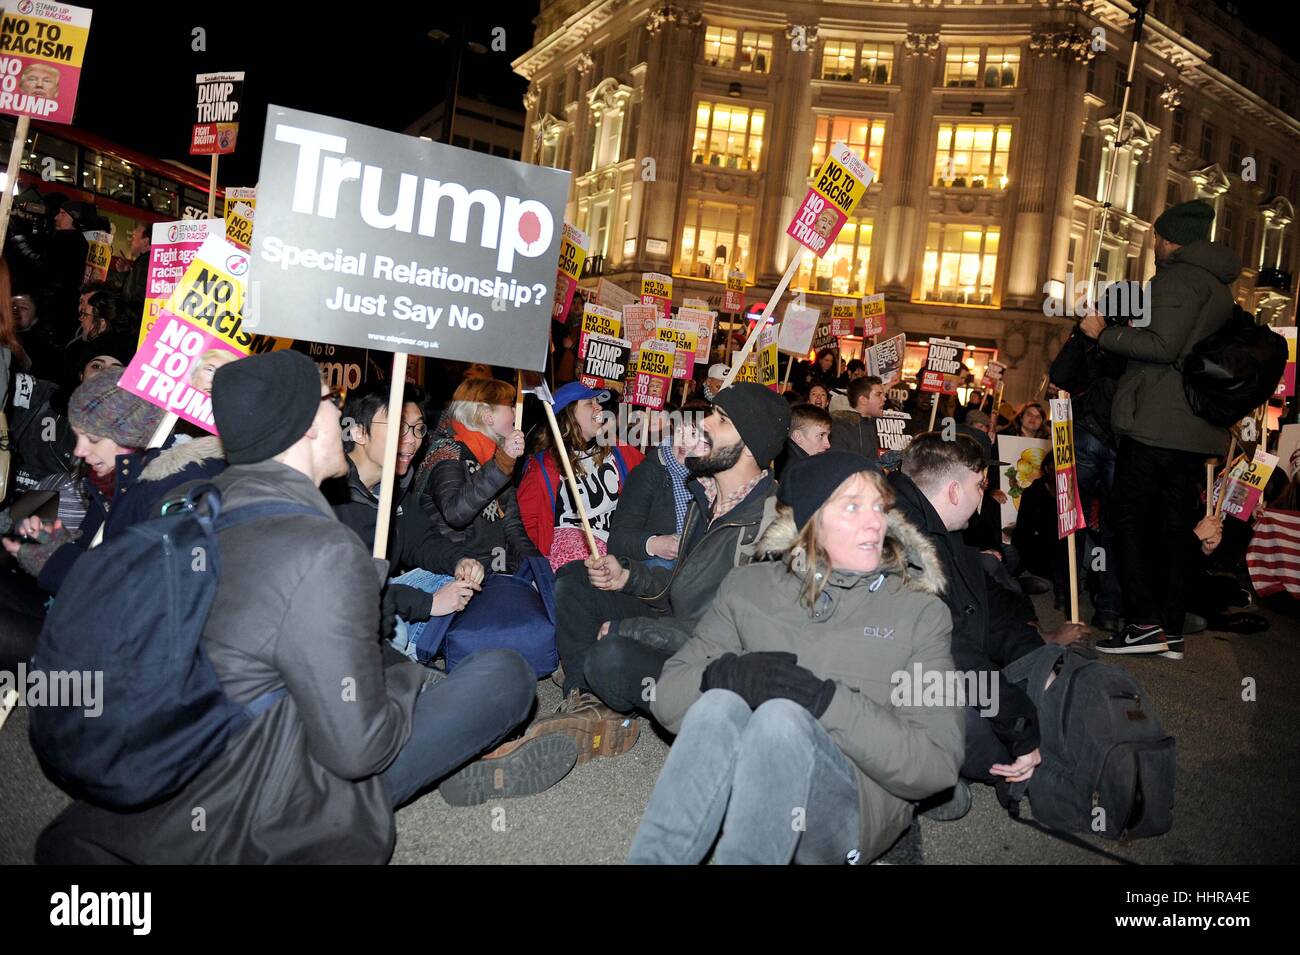 London, UK. 20th Jan, 2017. Donald Trump protest goes on an unofficial march through London from the US Embassy in London, UK Credit: Dorset Media Service/Alamy Live News Stock Photo